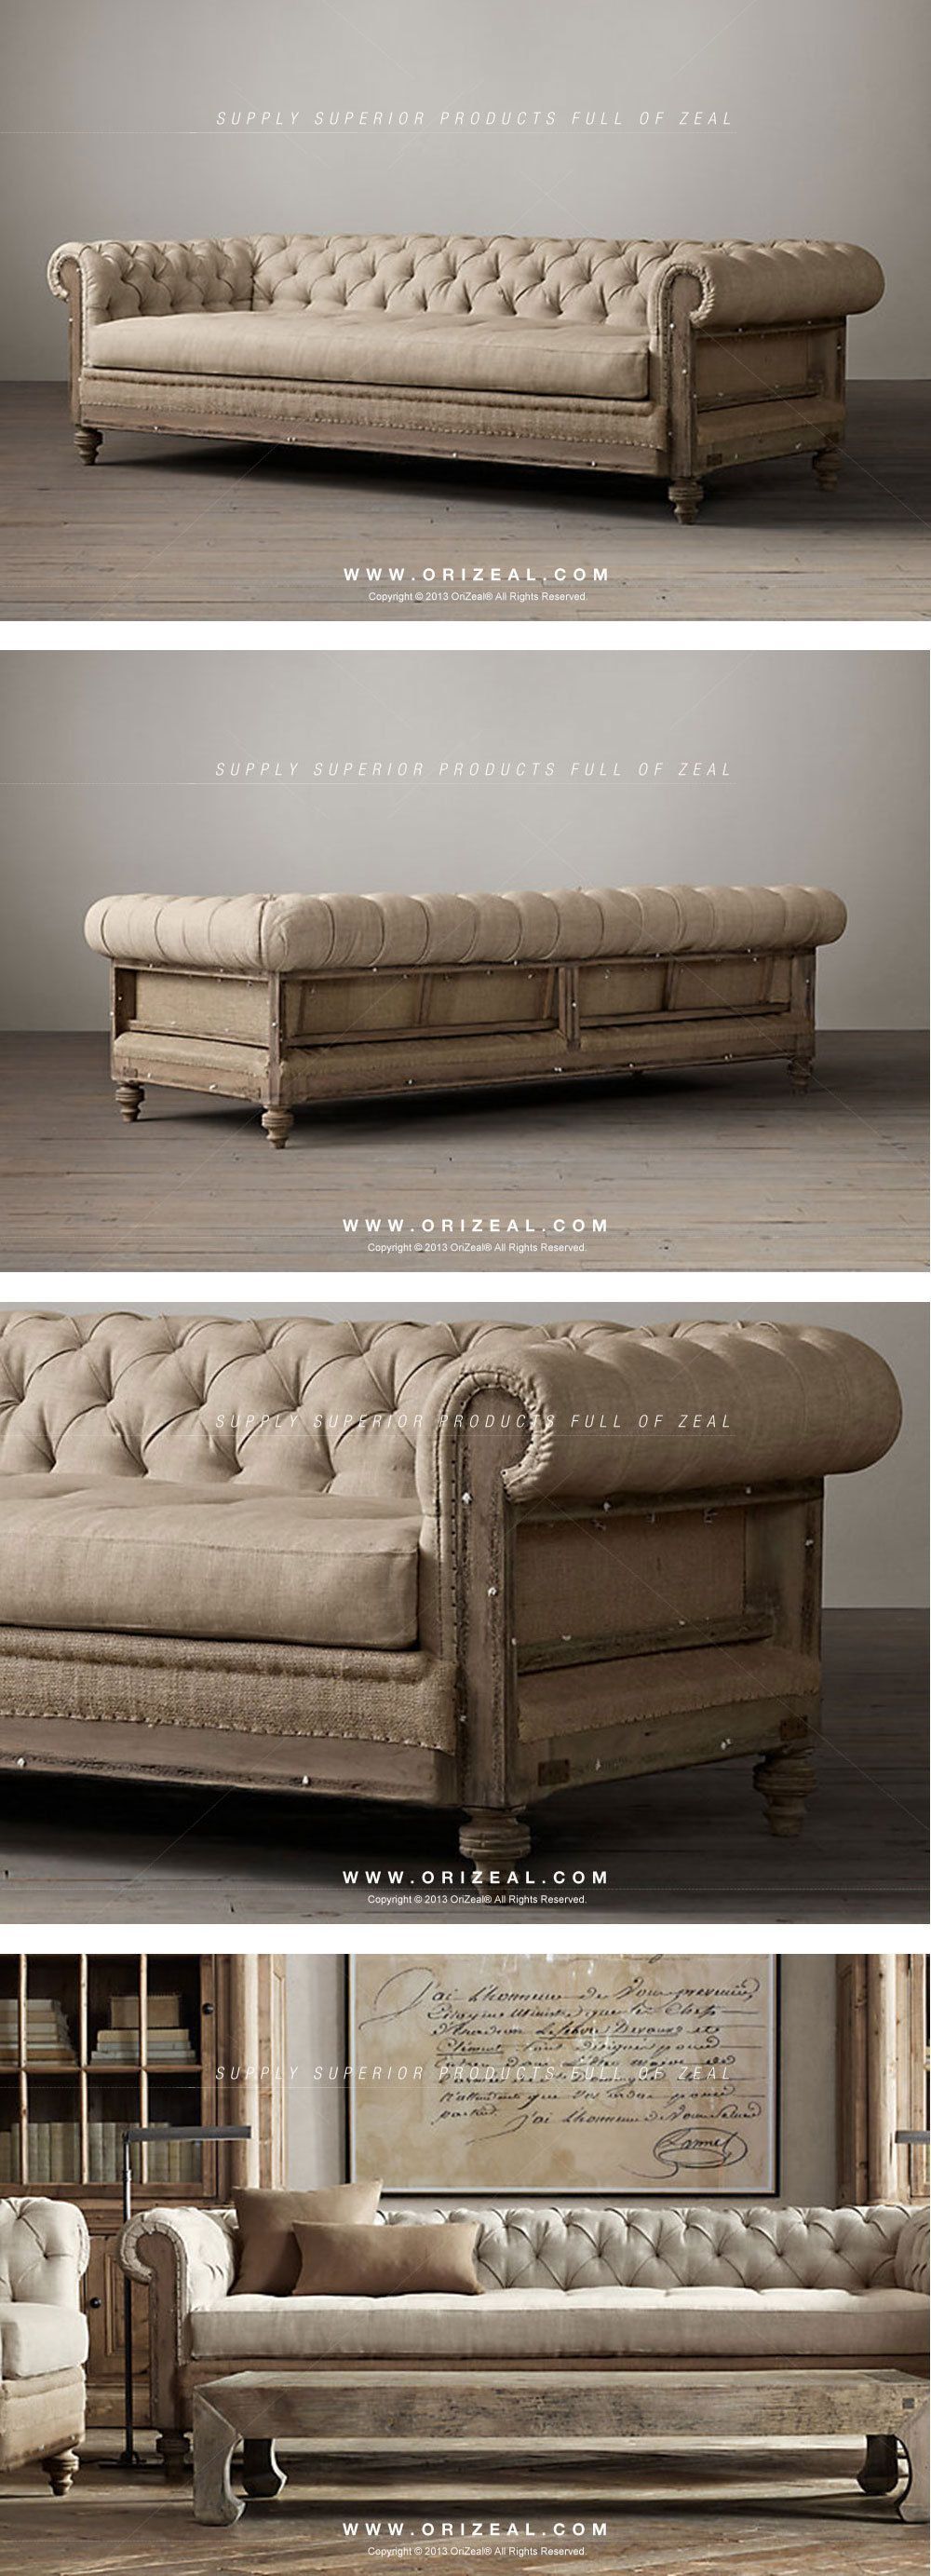 Orizeal Classic French Style Furniture Deconstructed Sofa with Old World Artistry -   23 french style furniture
 ideas